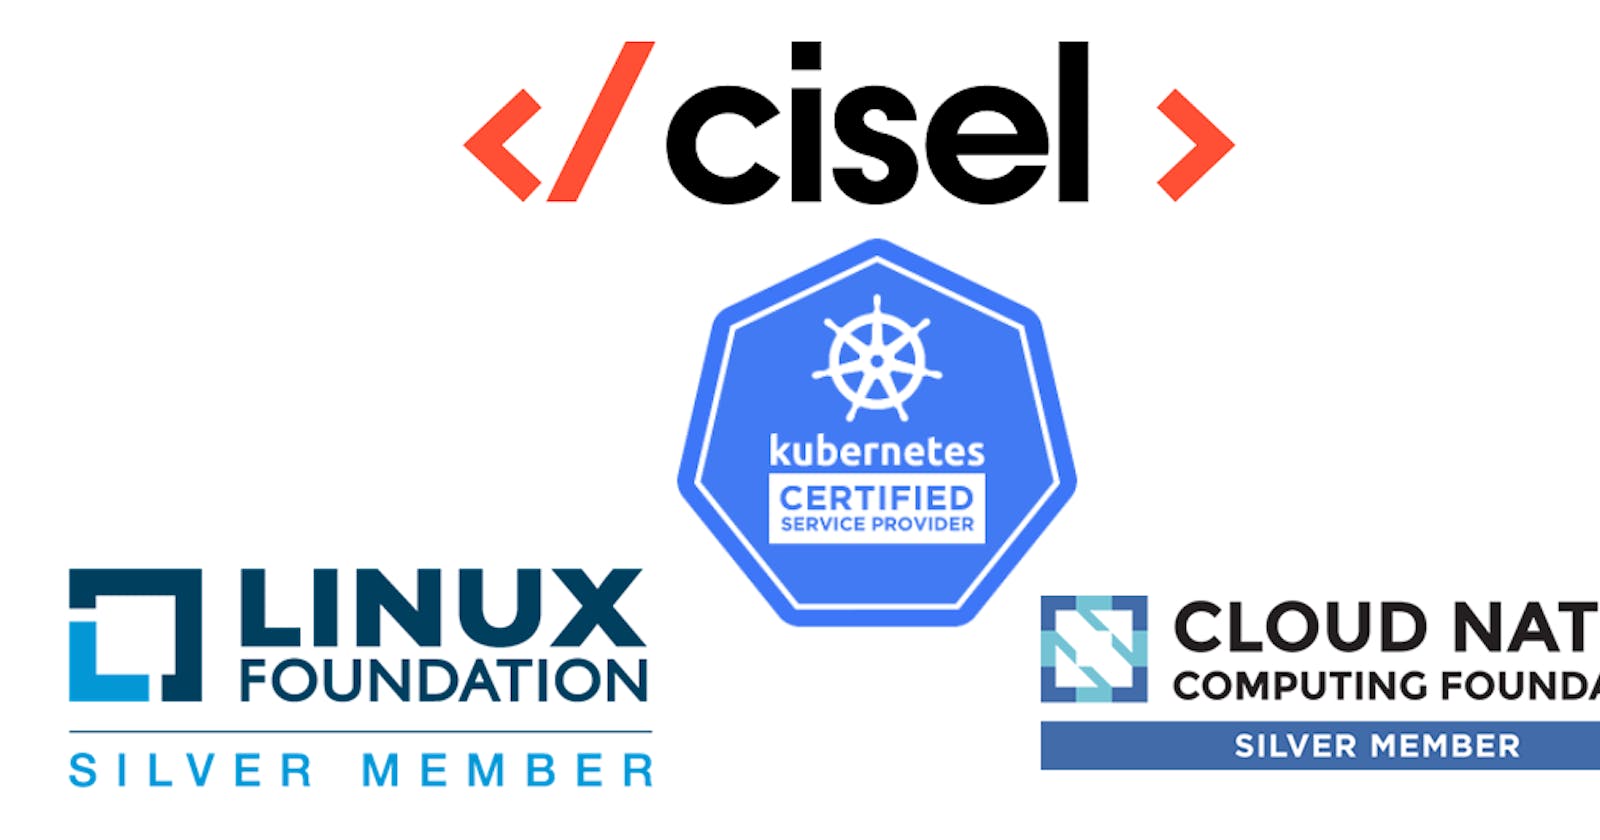 A journey to become KCSP (Kubernetes Certified Service Provider)